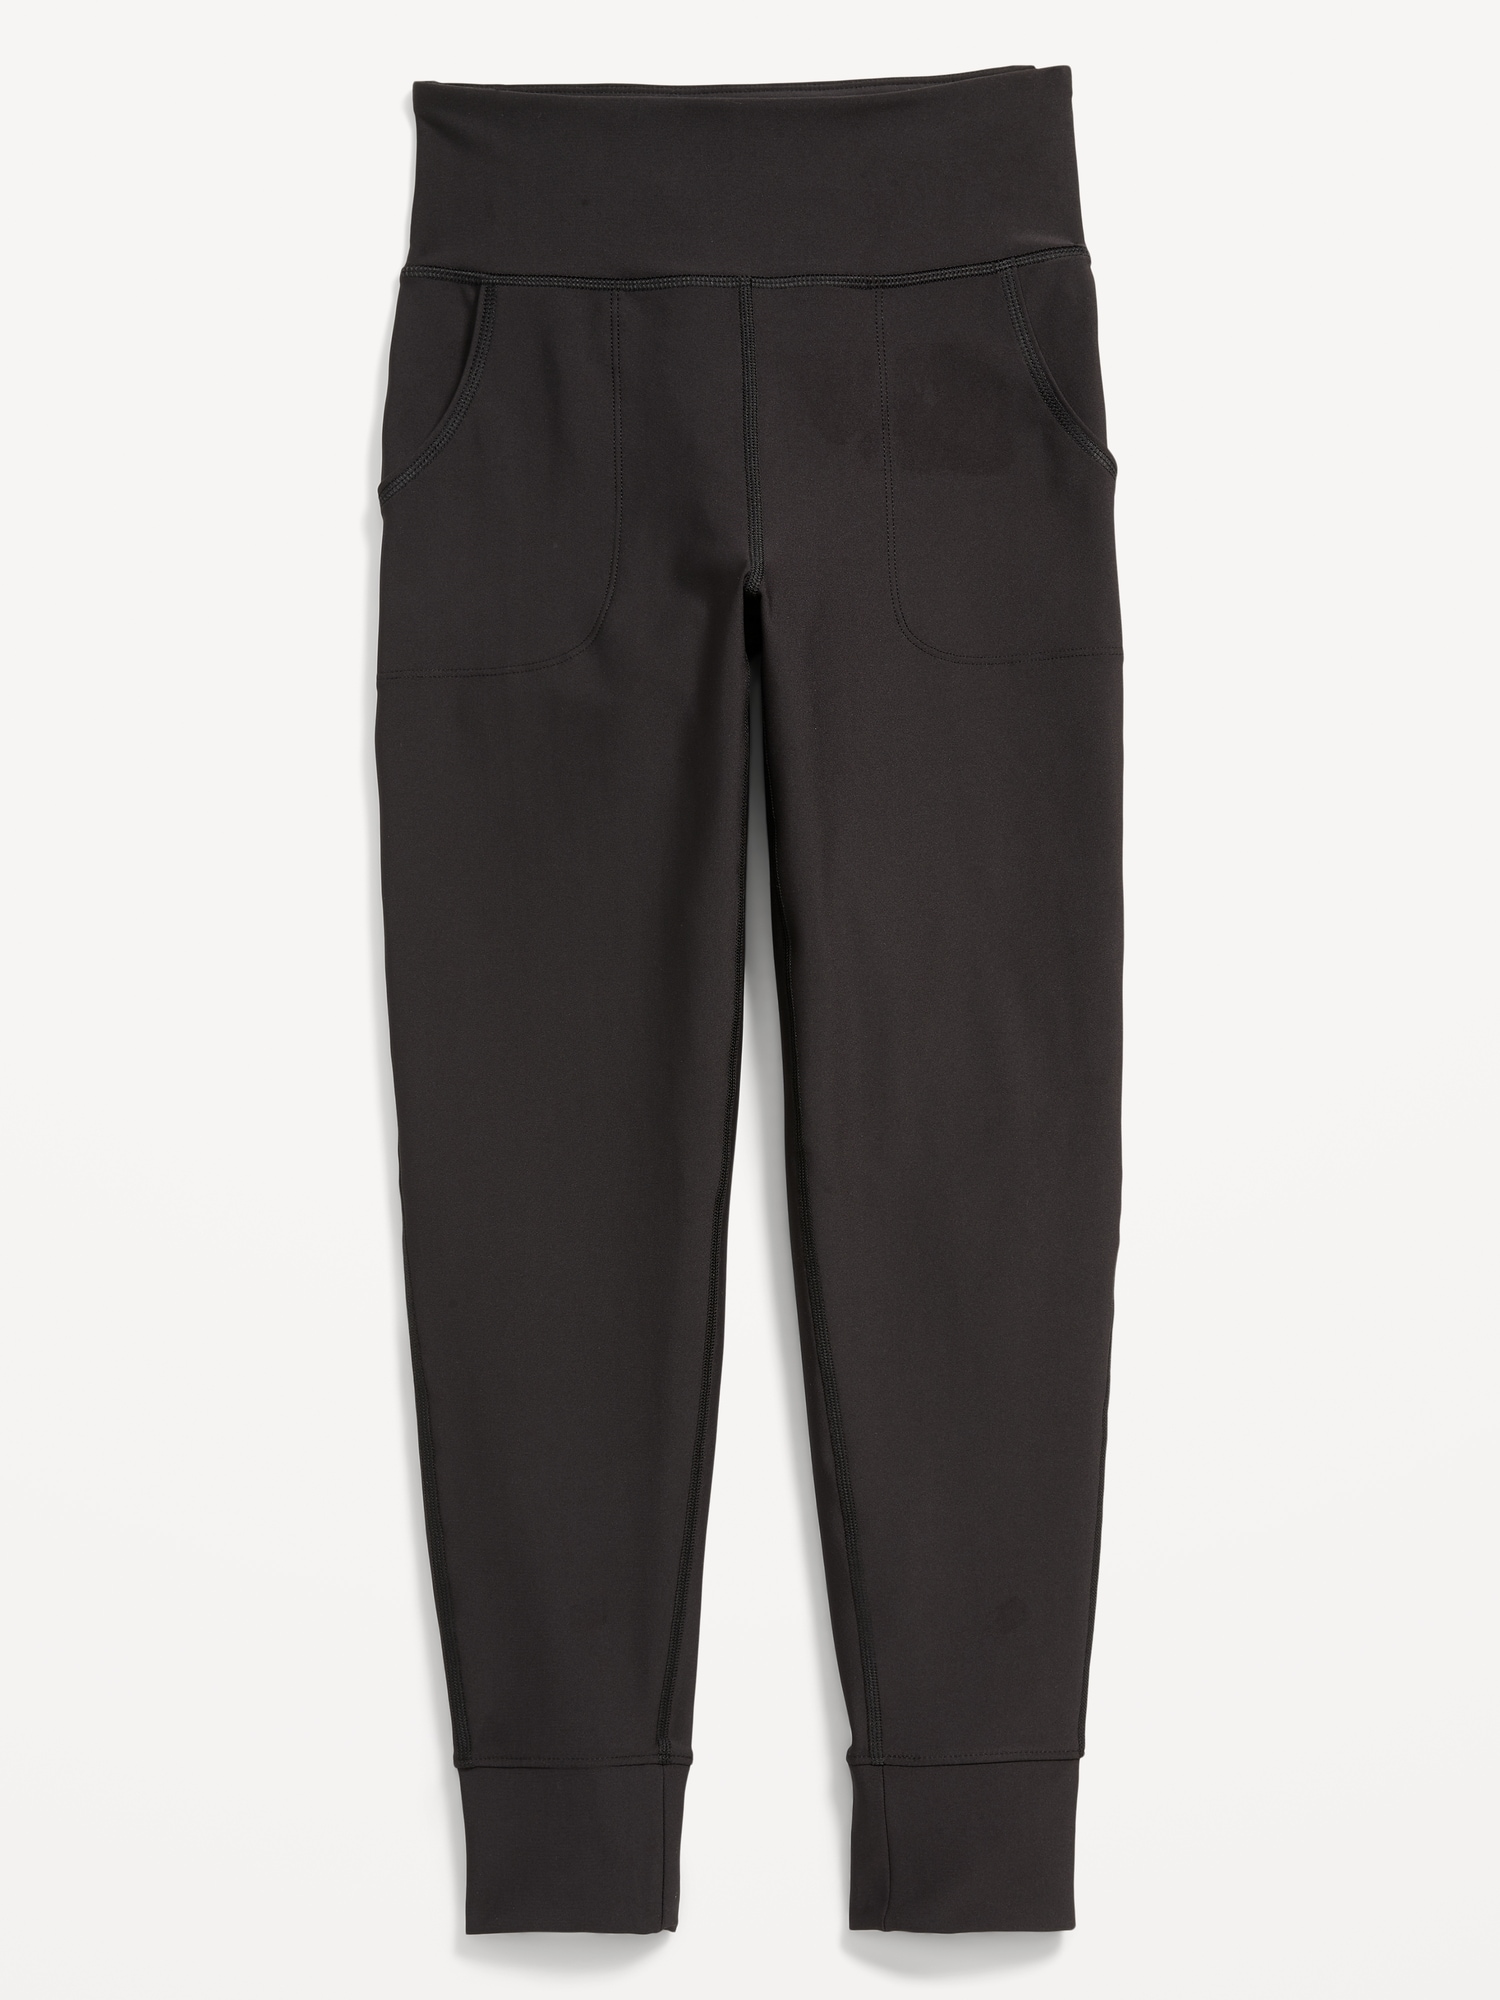 Old Navy - High-Waisted PowerSoft 7/8-Length Joggers for Women